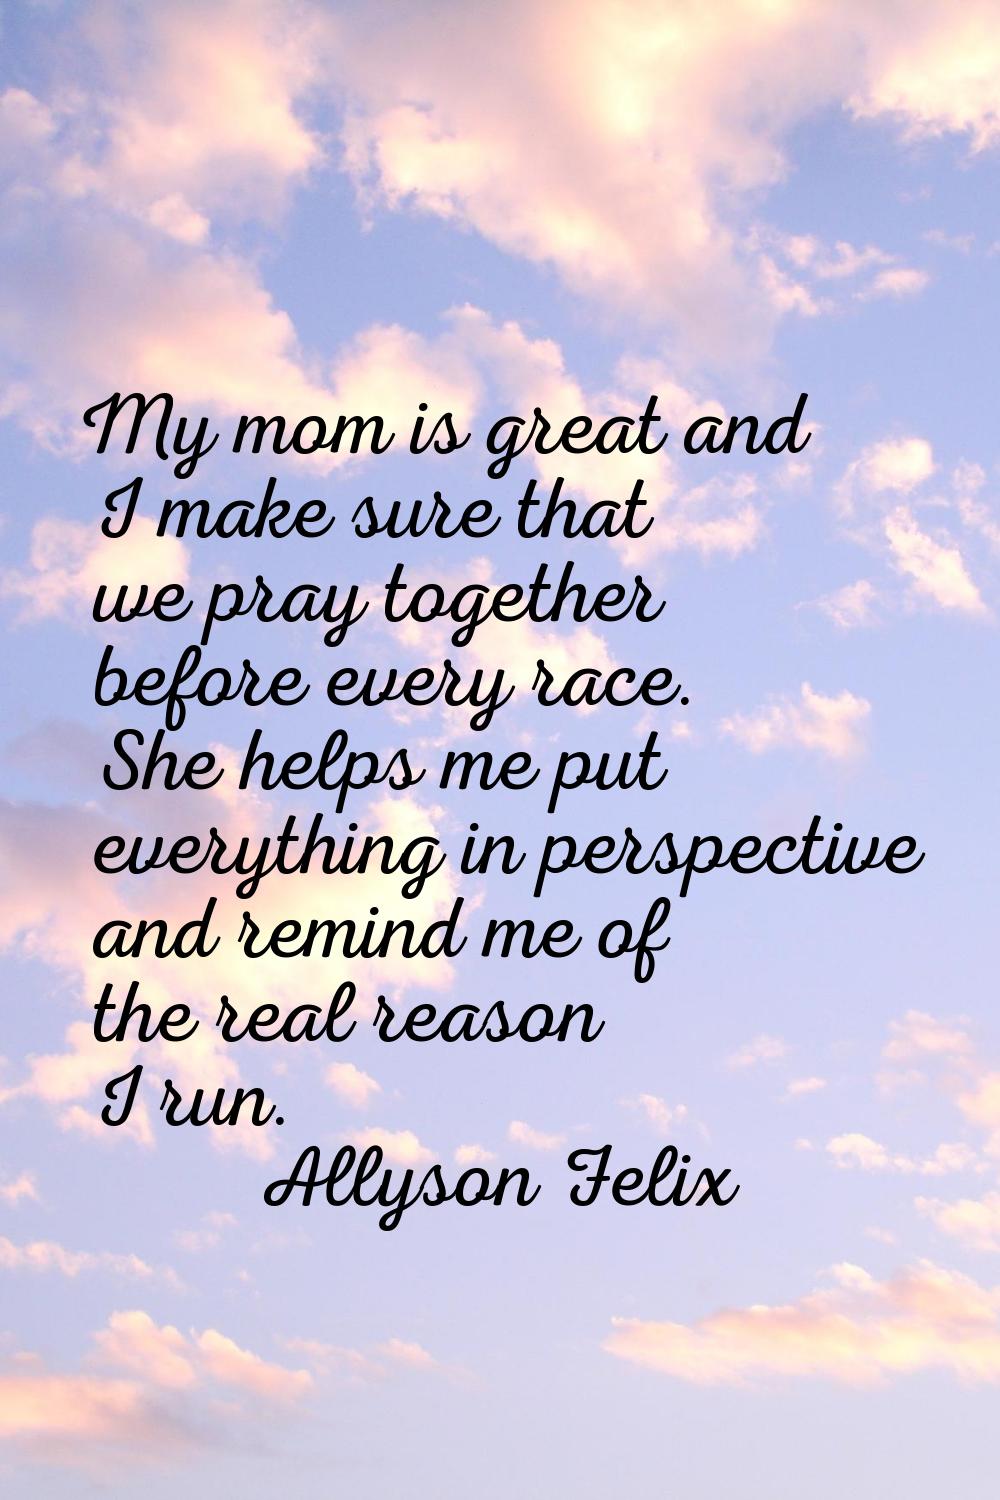 My mom is great and I make sure that we pray together before every race. She helps me put everythin